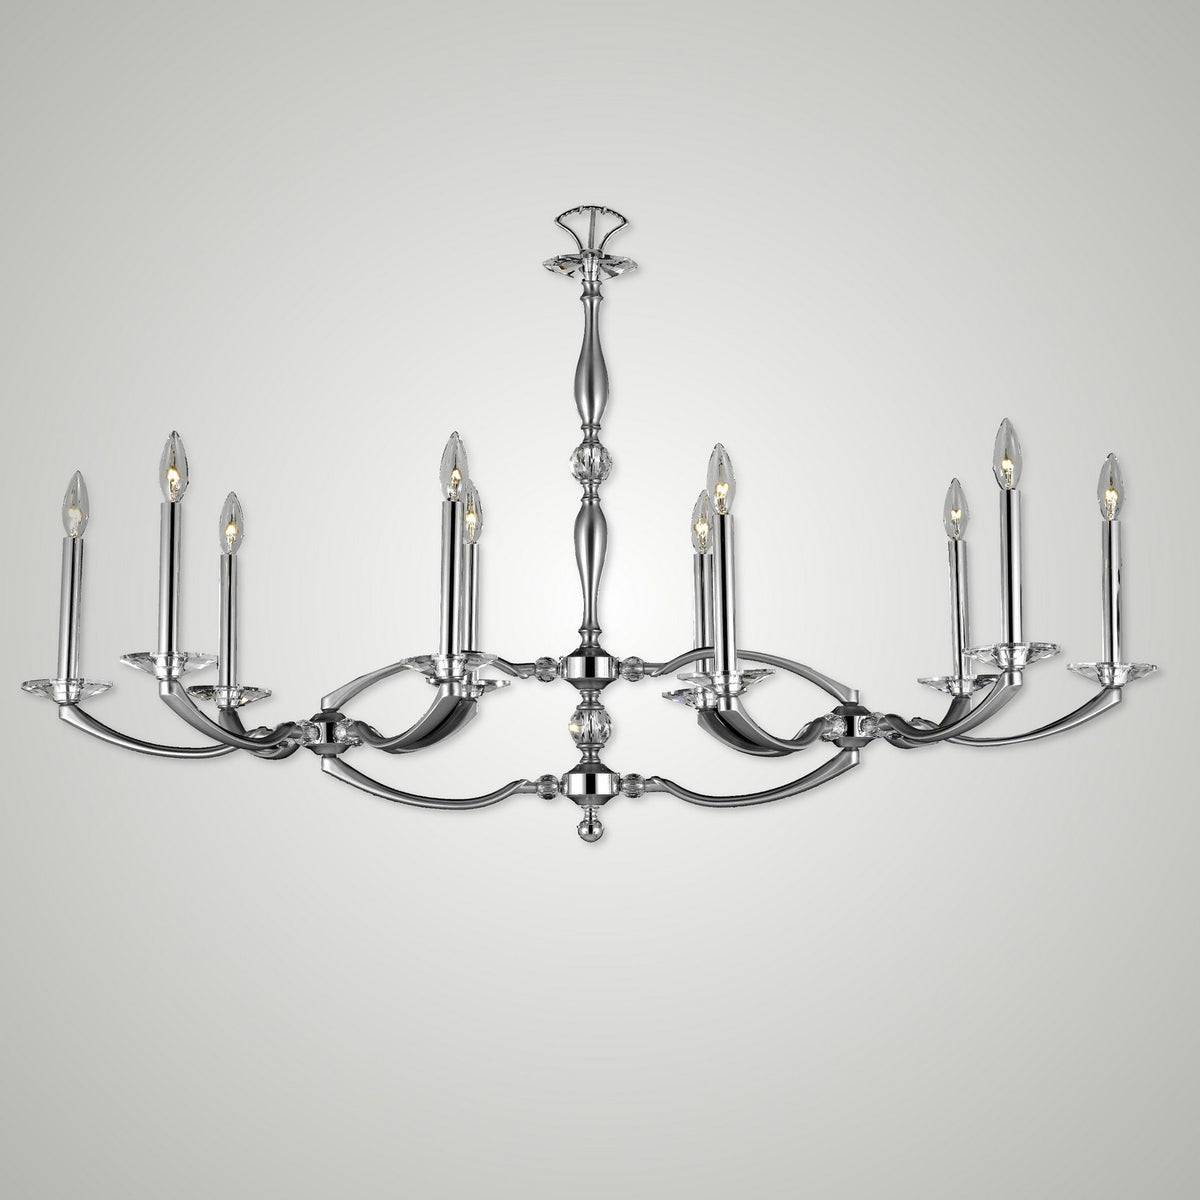 Kensington Brass and Crystal Linear  IL5347 Chandelier